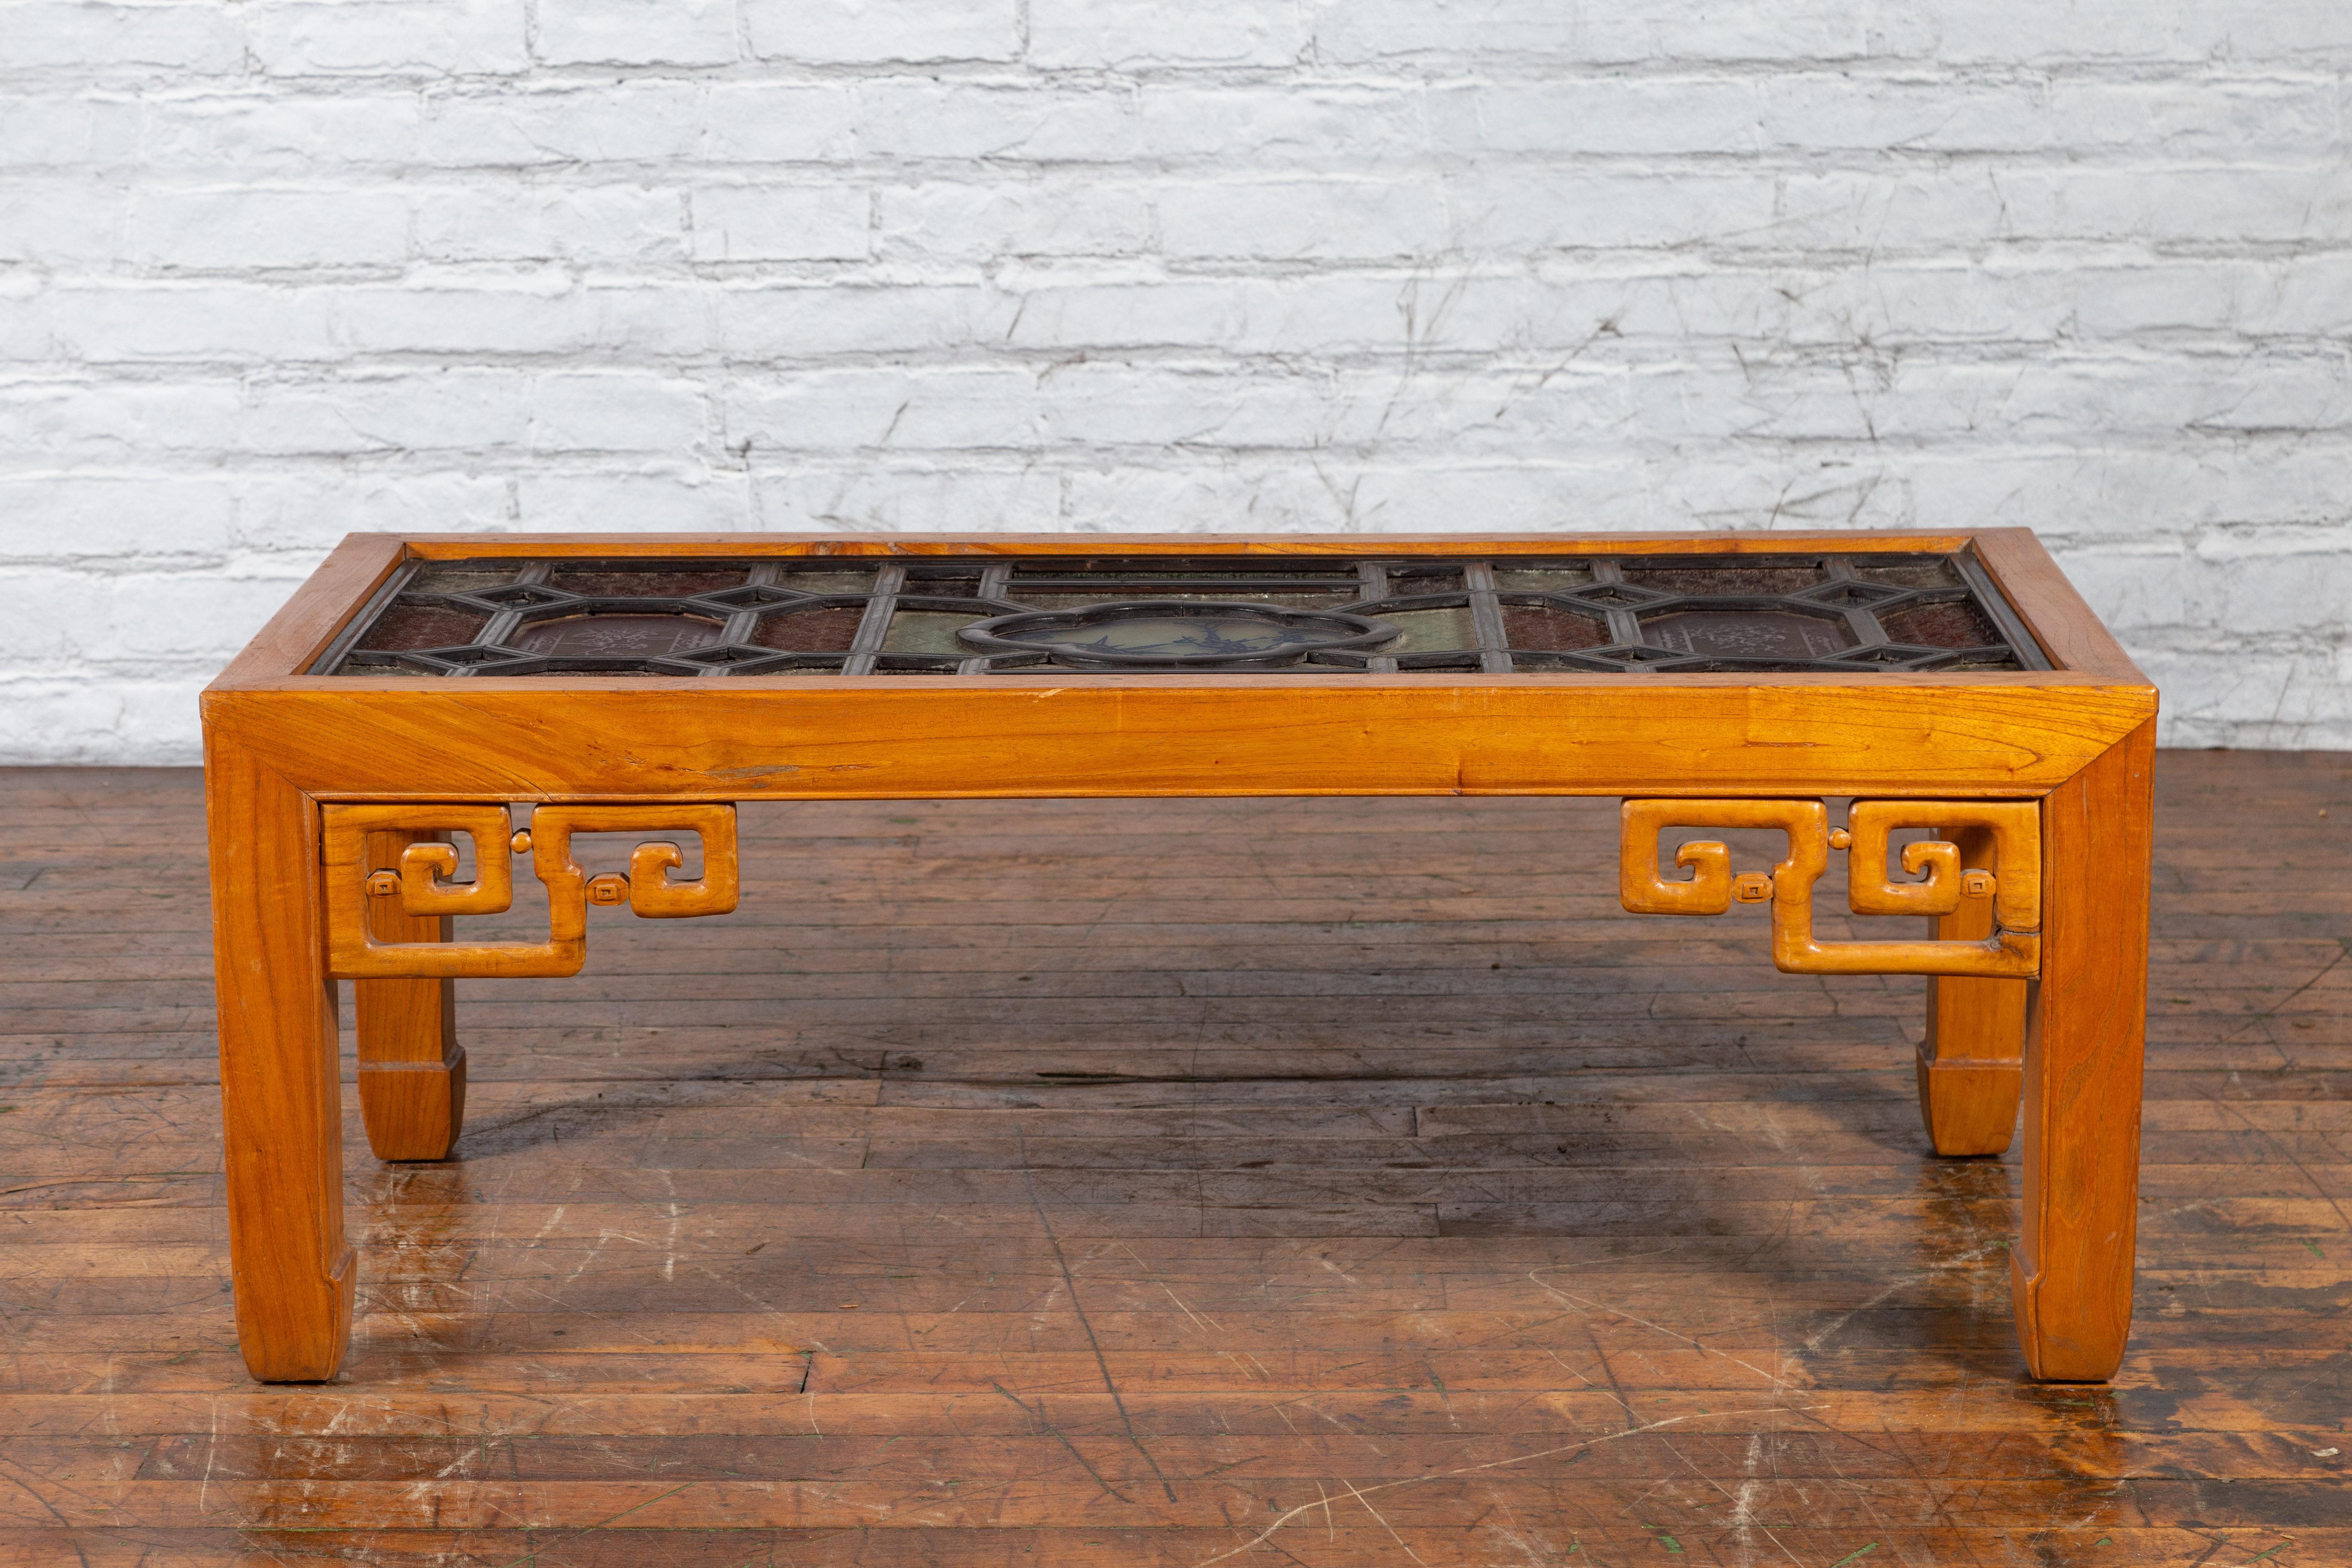 A Chinese Qing Dynasty period wooden coffee table from the 19th century with stained glass top and openwork motifs. Created in China during the Qing Dynasty, this coffee table features a rectangular top adorned with multicolored embossed stained